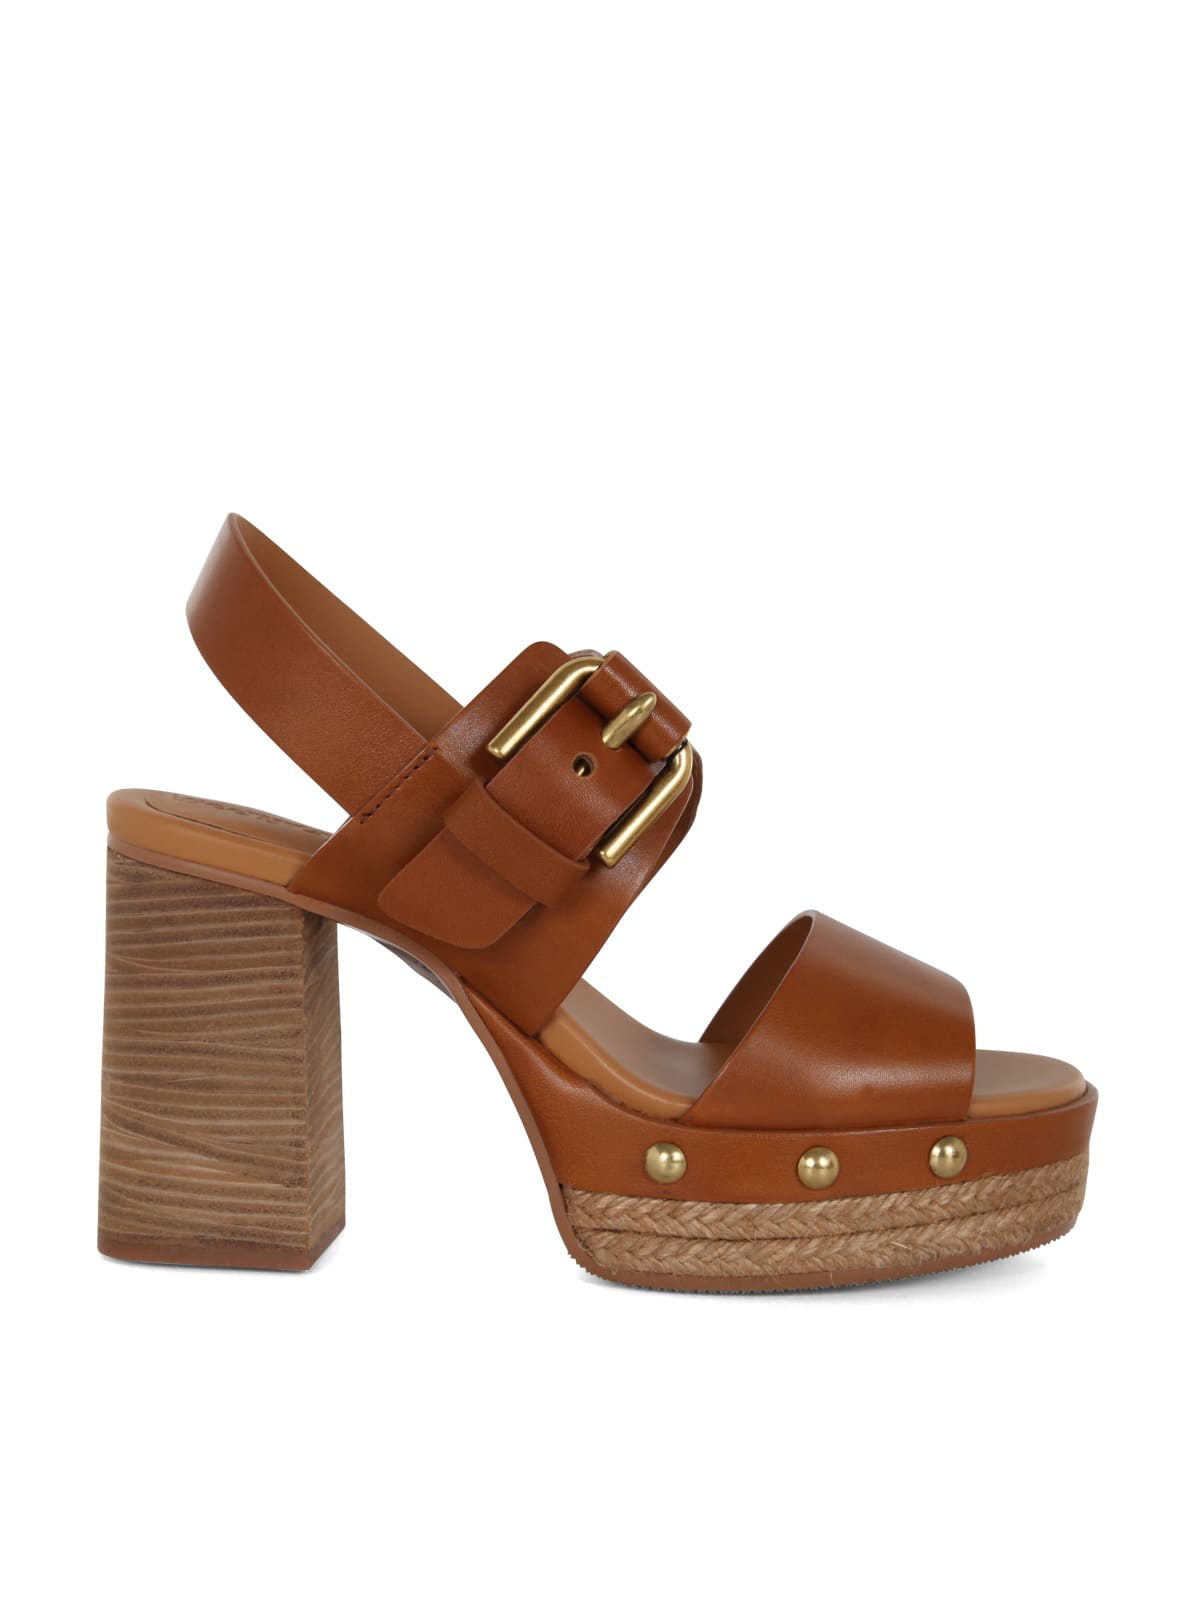 SEE BY CHLOÉ JOLINE HEELED SANDALS WITH BANDS